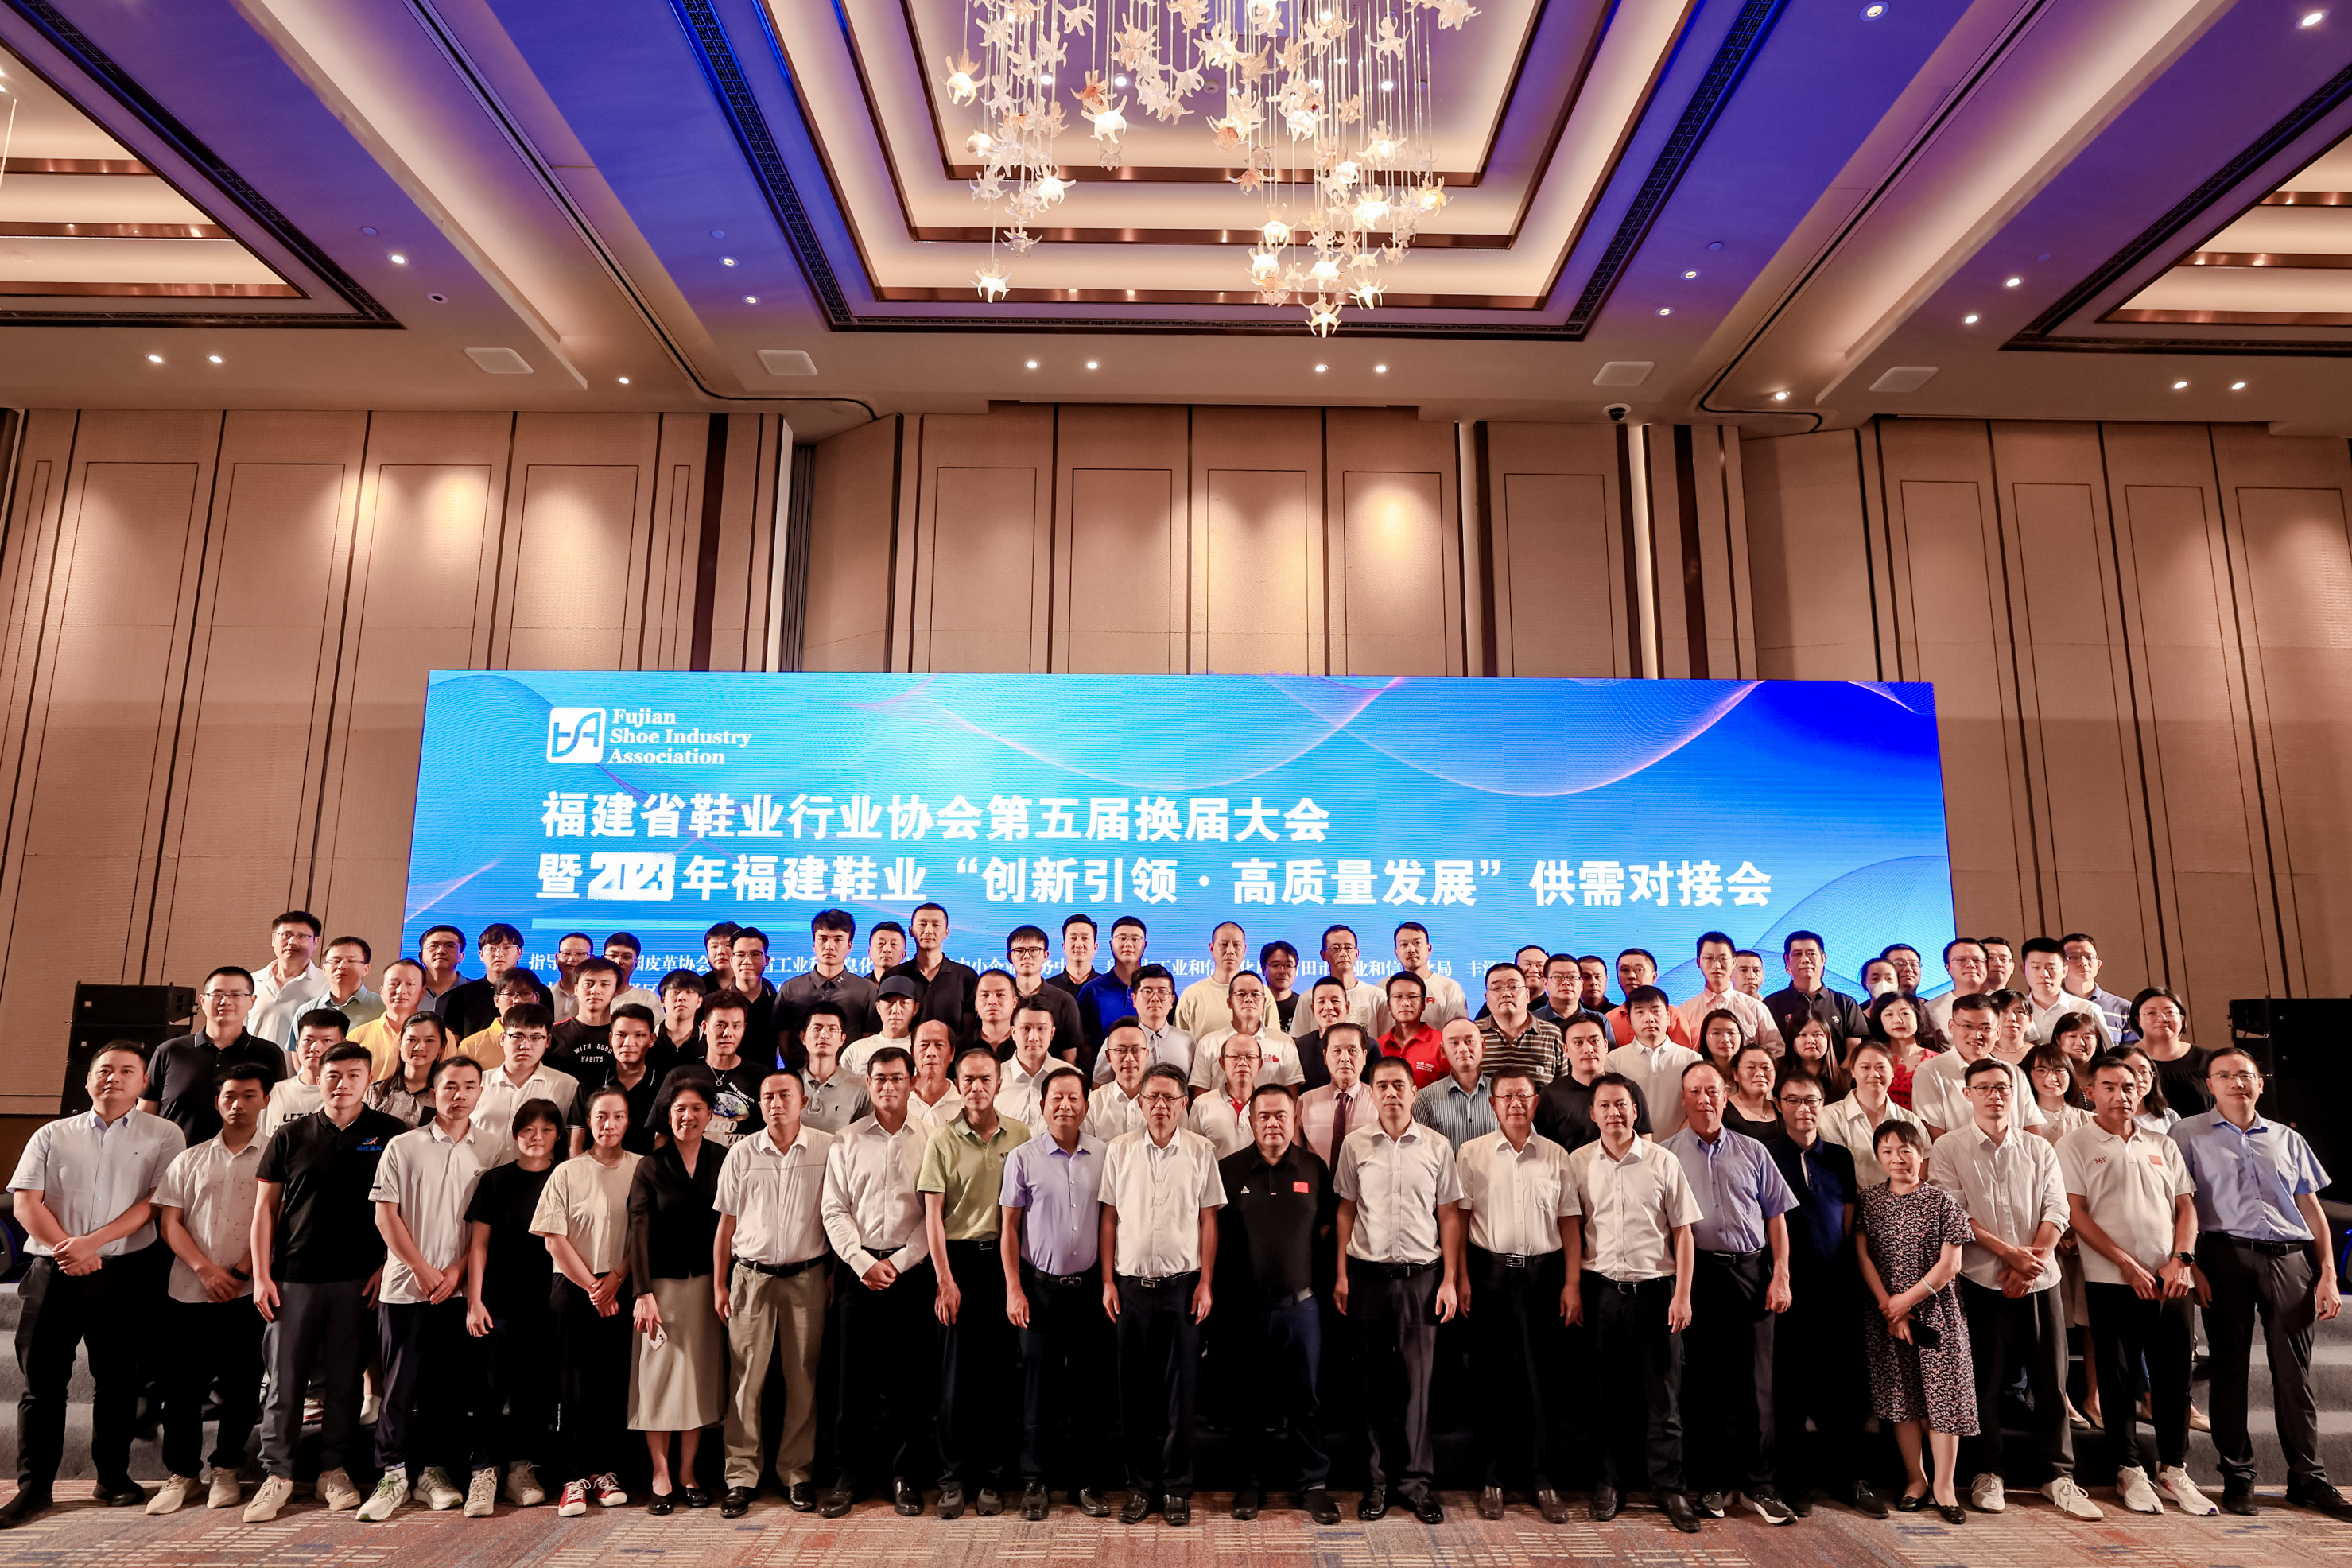 c&d light industry elected executive vice president of fujian footwear industry association